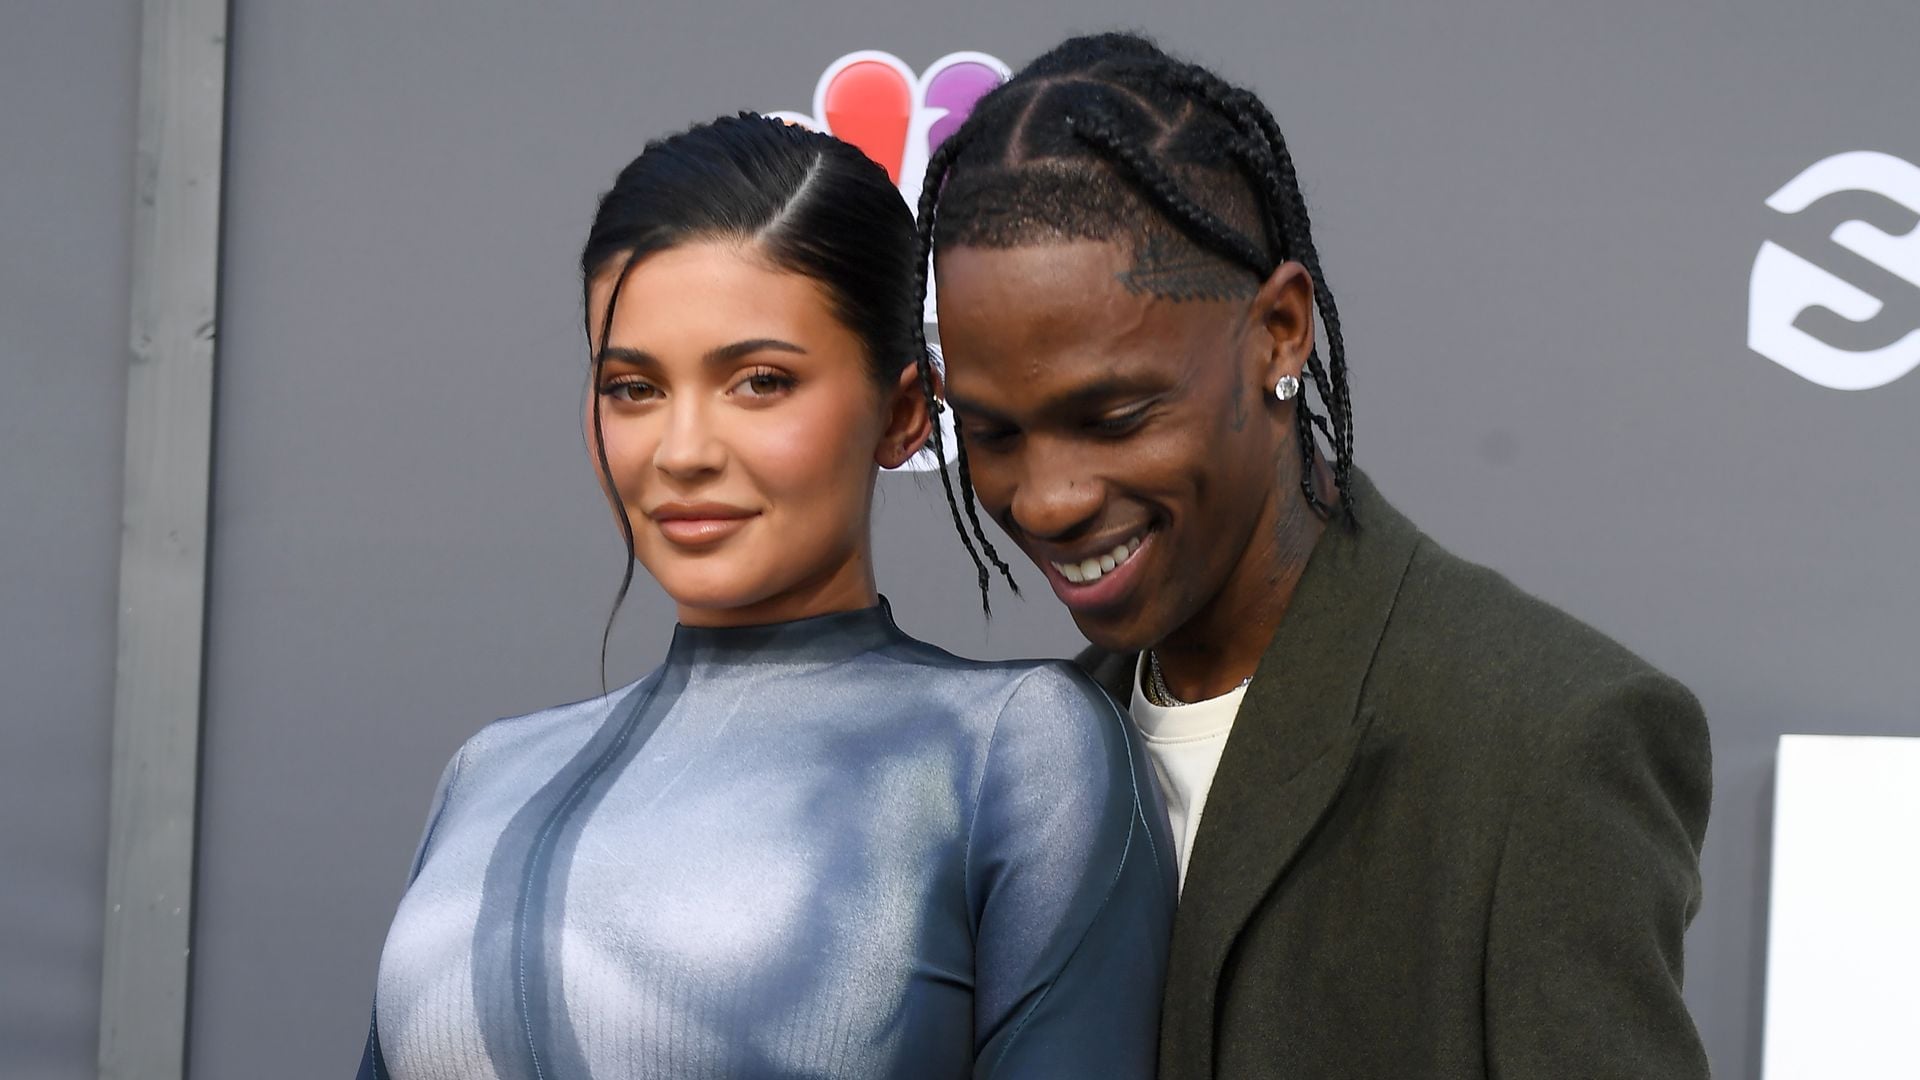 Kylie Jenner and Travis Scott attend the 2022 Billboard Music Awards at MGM Grand Garden Arena on May 15, 2022 in Las Vegas, Nevada. (Photo by Bryan Steffy/WireImage)